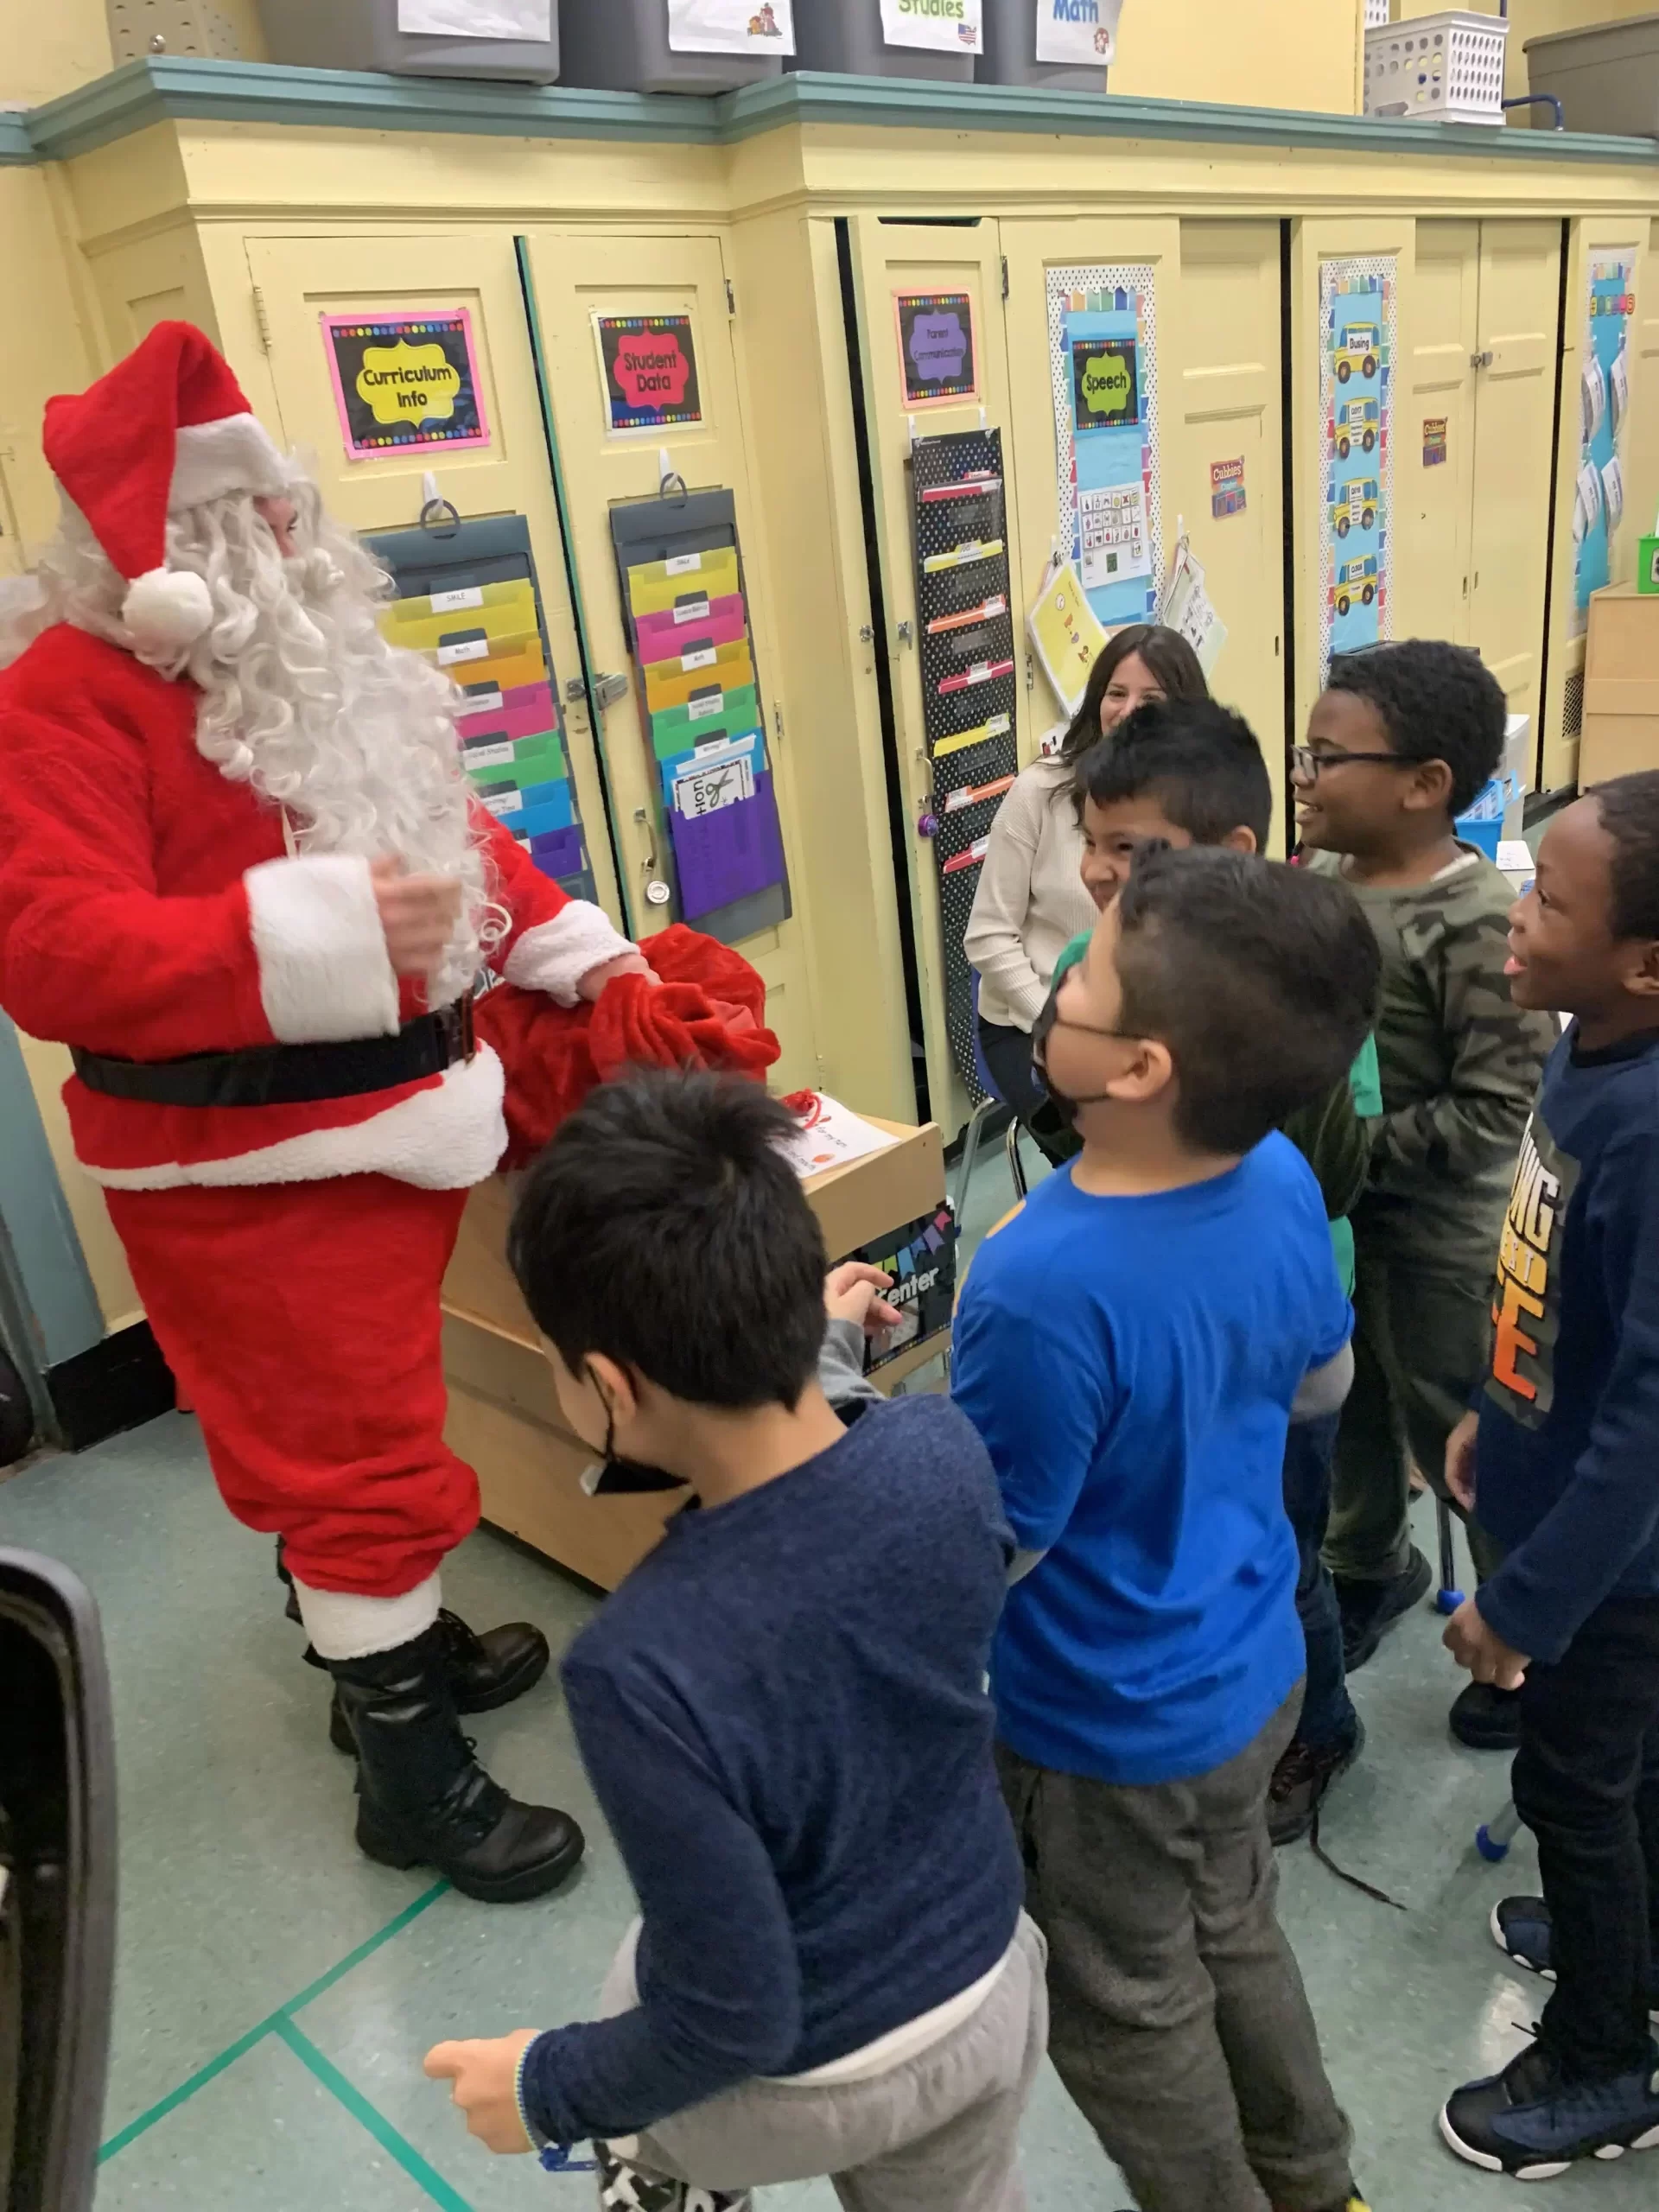 Five elementary school students meeting Santa Clause in their classroom.